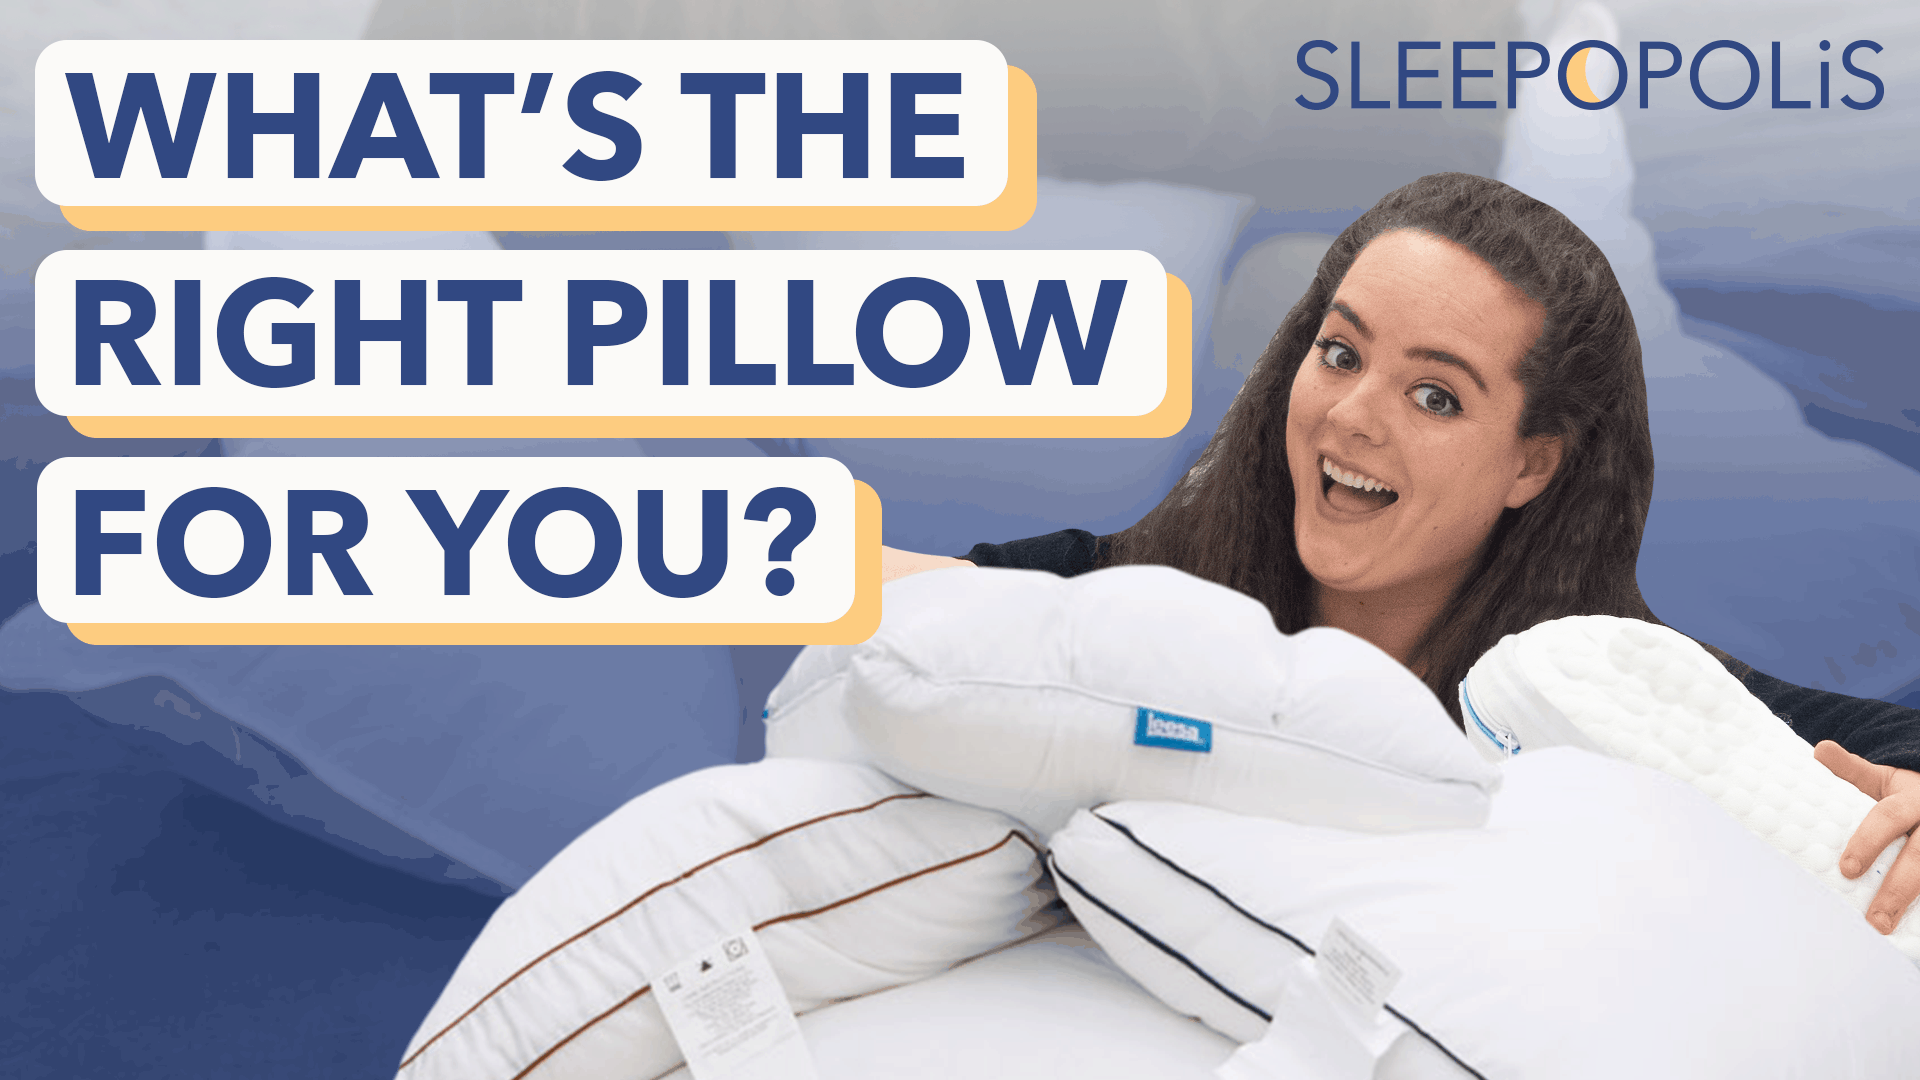 How To Choose A Pillow That's Just Right For Your Sleep - Forbes Vetted